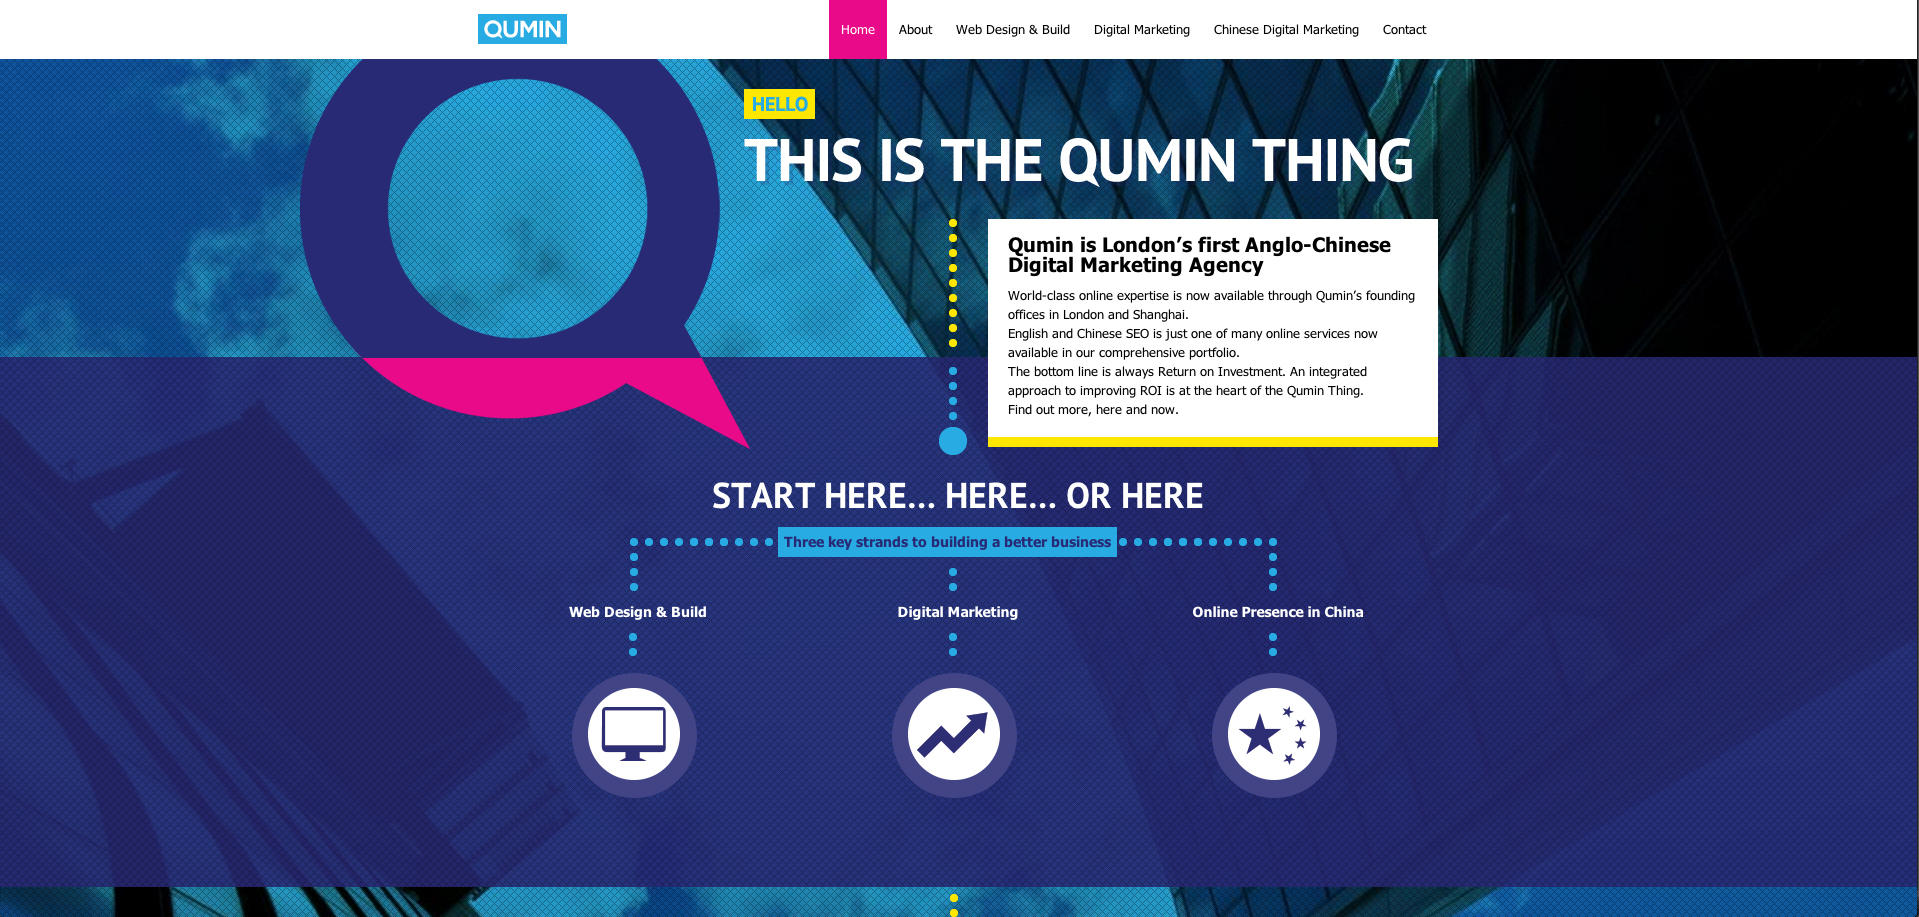 In less than two years, Qumin has landed some high-profile clients.